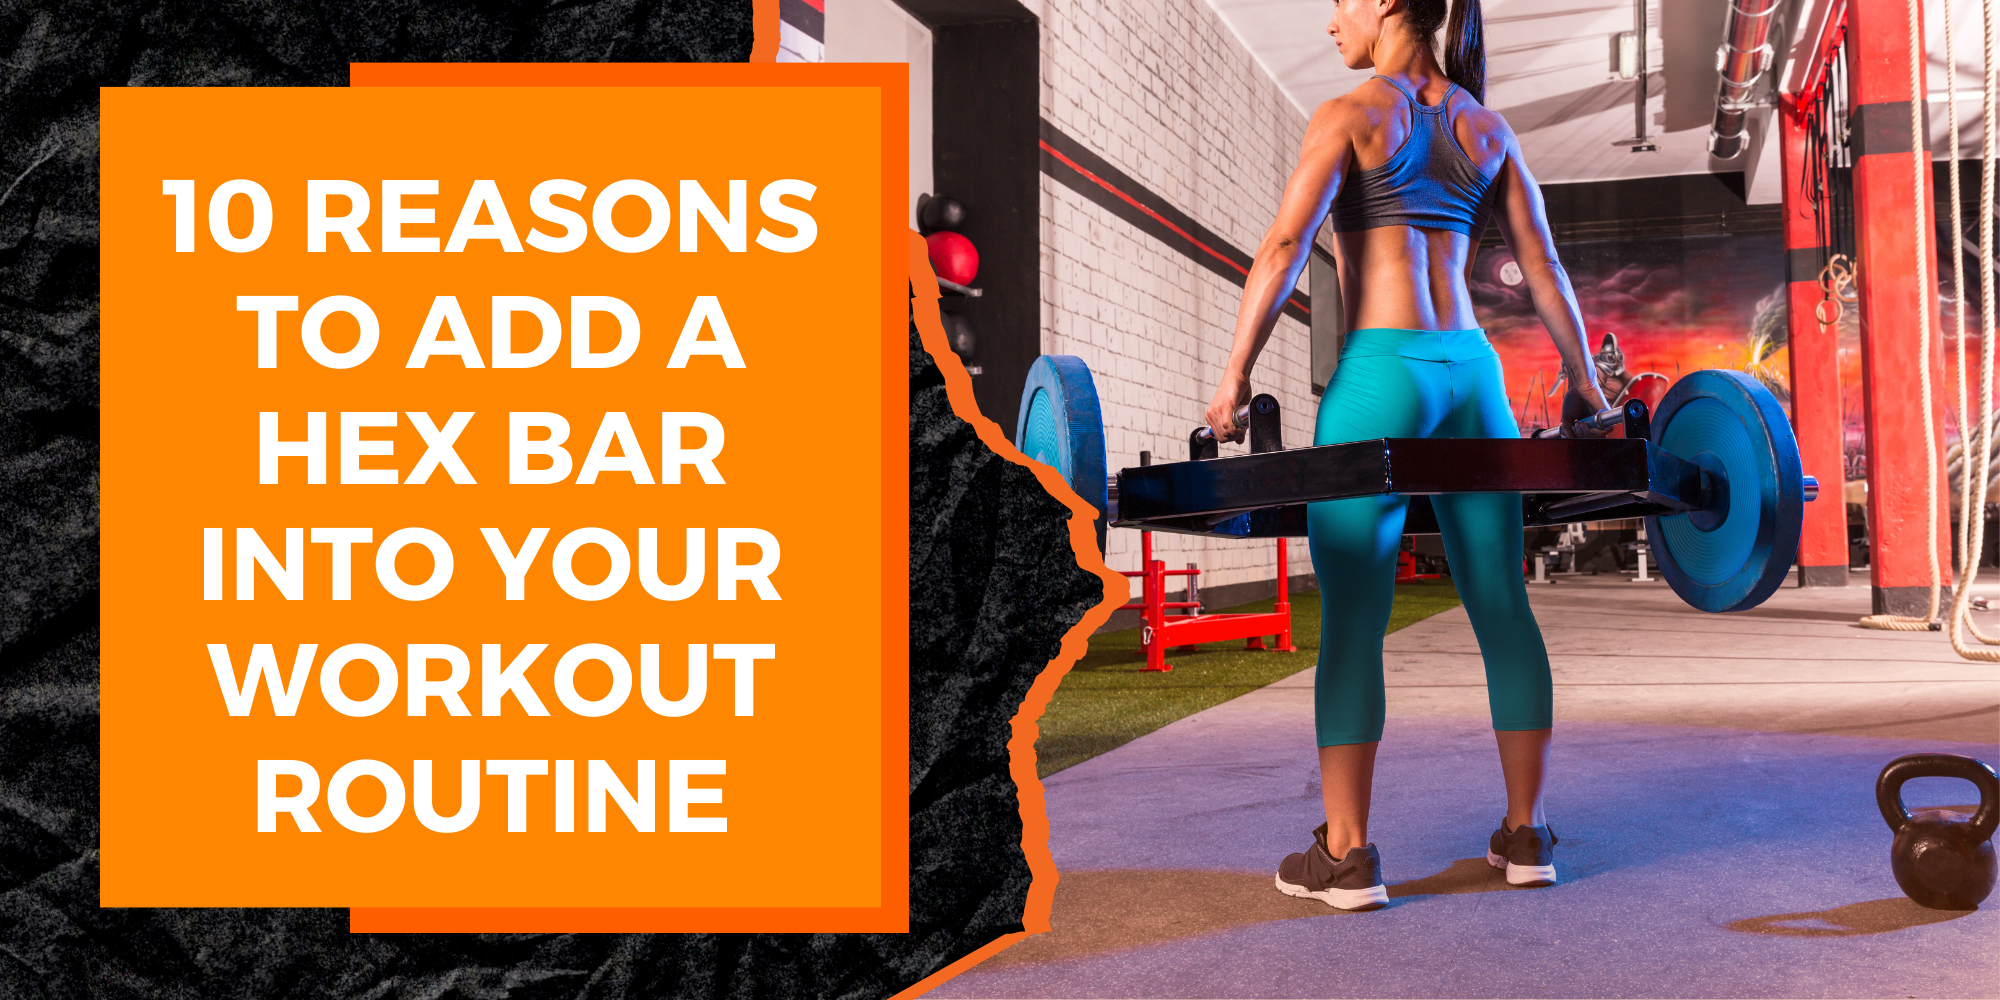 10 Reasons to Incorporate a Hex Bar Into Your Workout Routine